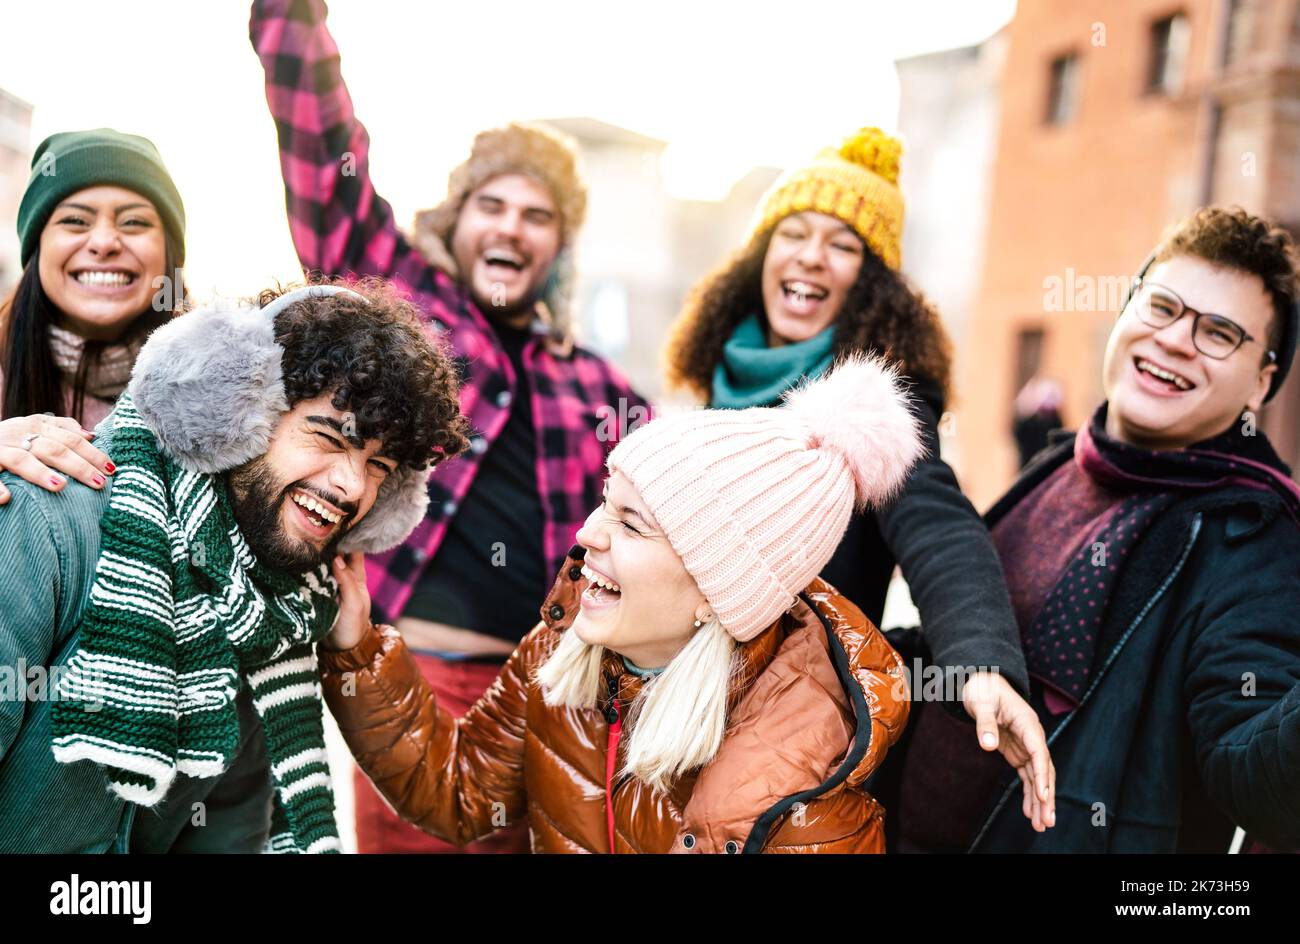 International guys and girls taking funny face selfie wearing warm fashion clothes - Happy life style concept with milenial people having fun together Stock Photo